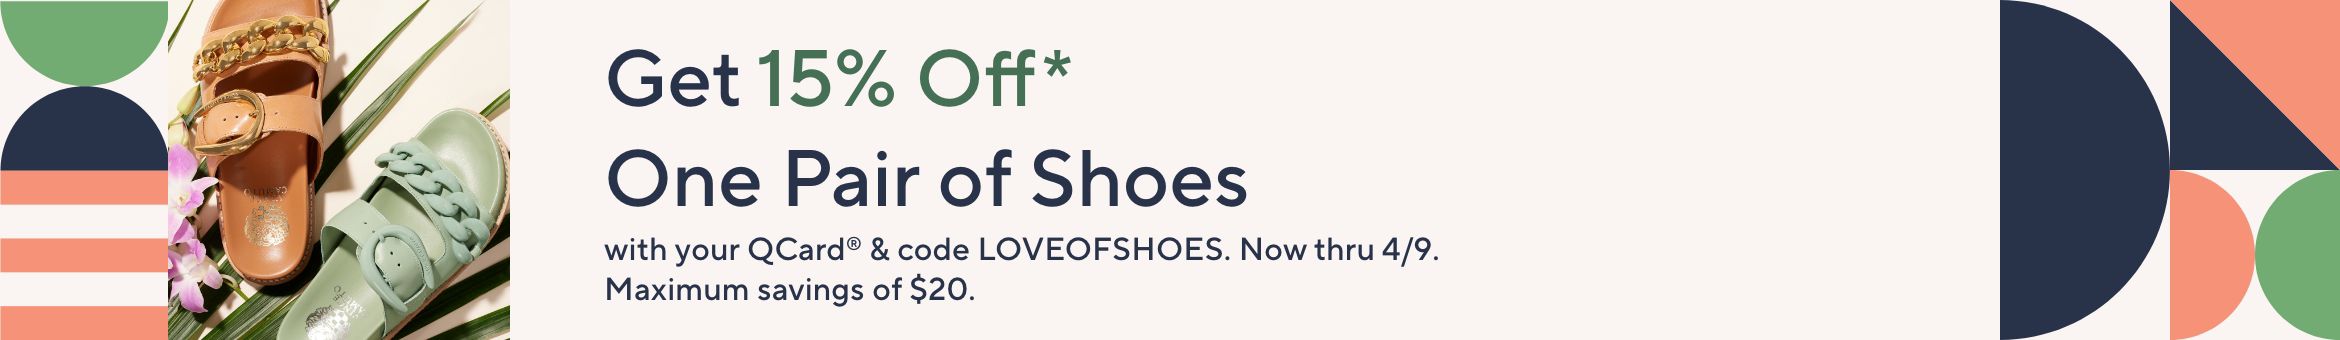 Get 15% Off* One Pair of Shoes with your QCard® & code LOVEOFSHOES. Now thru 4/9. Maximum savings of $20.